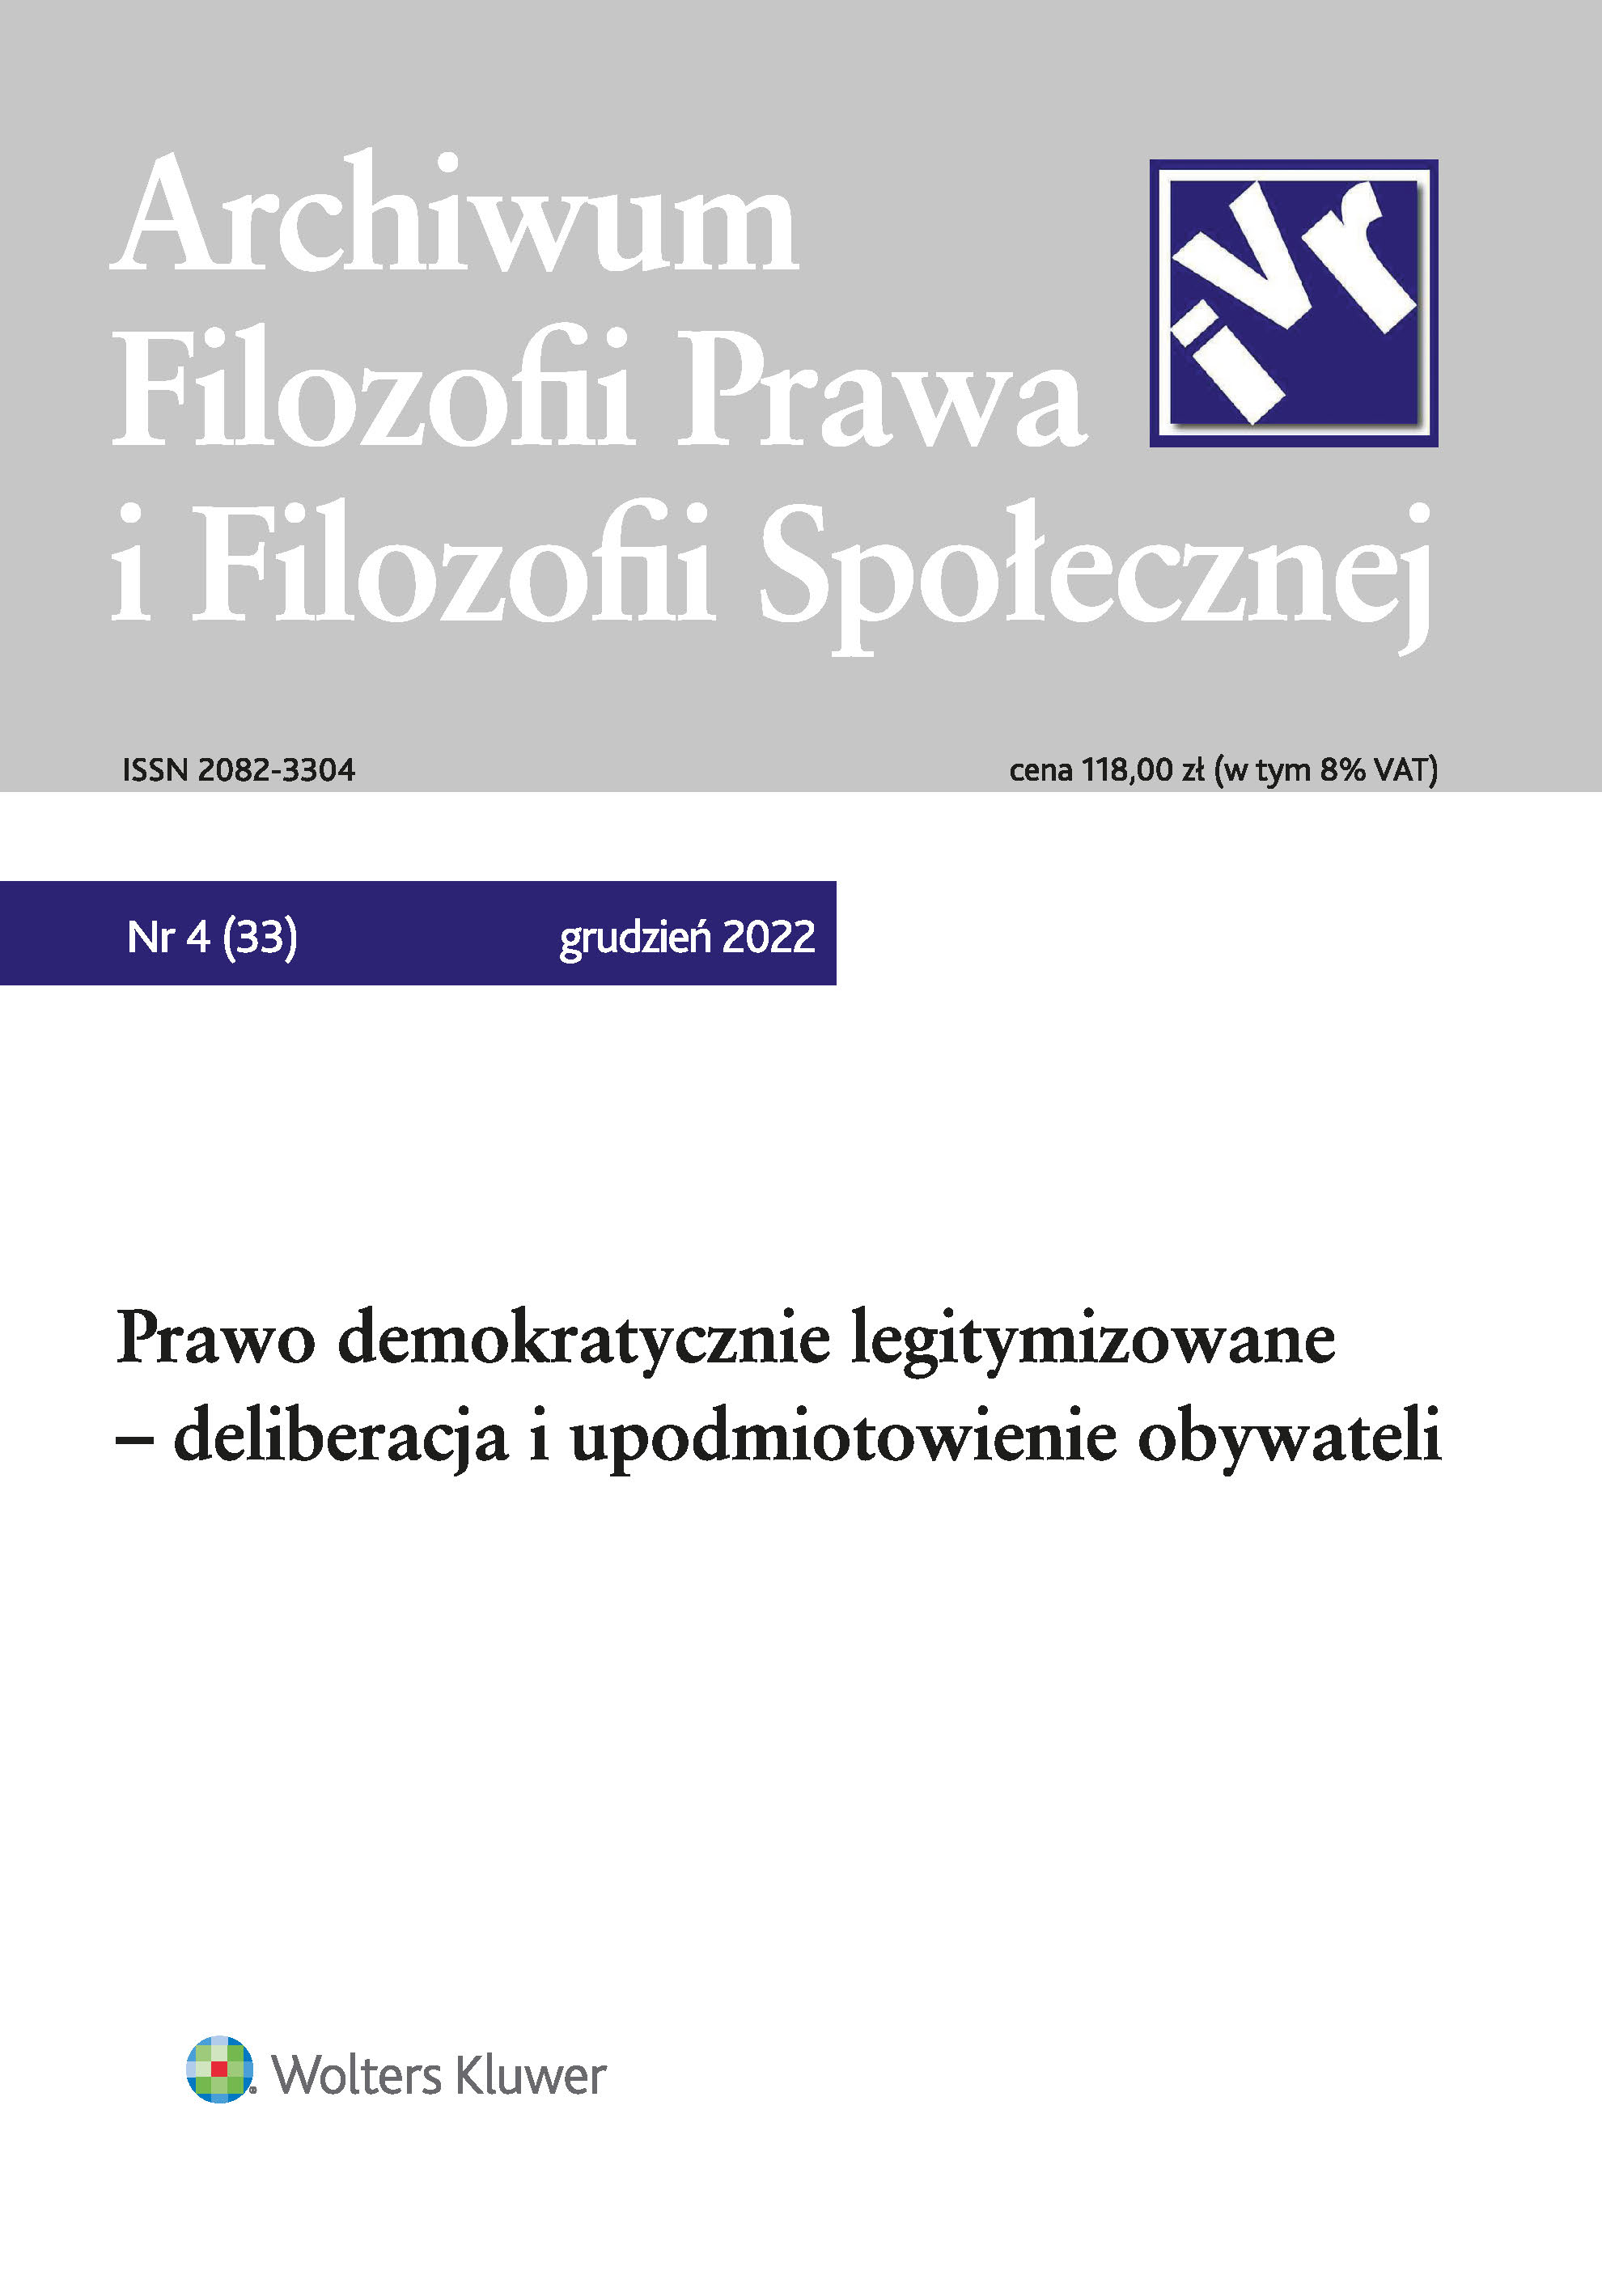 Democratically Legitimized Law: Deliberation and Empowerment of Citizens. Introduction Cover Image